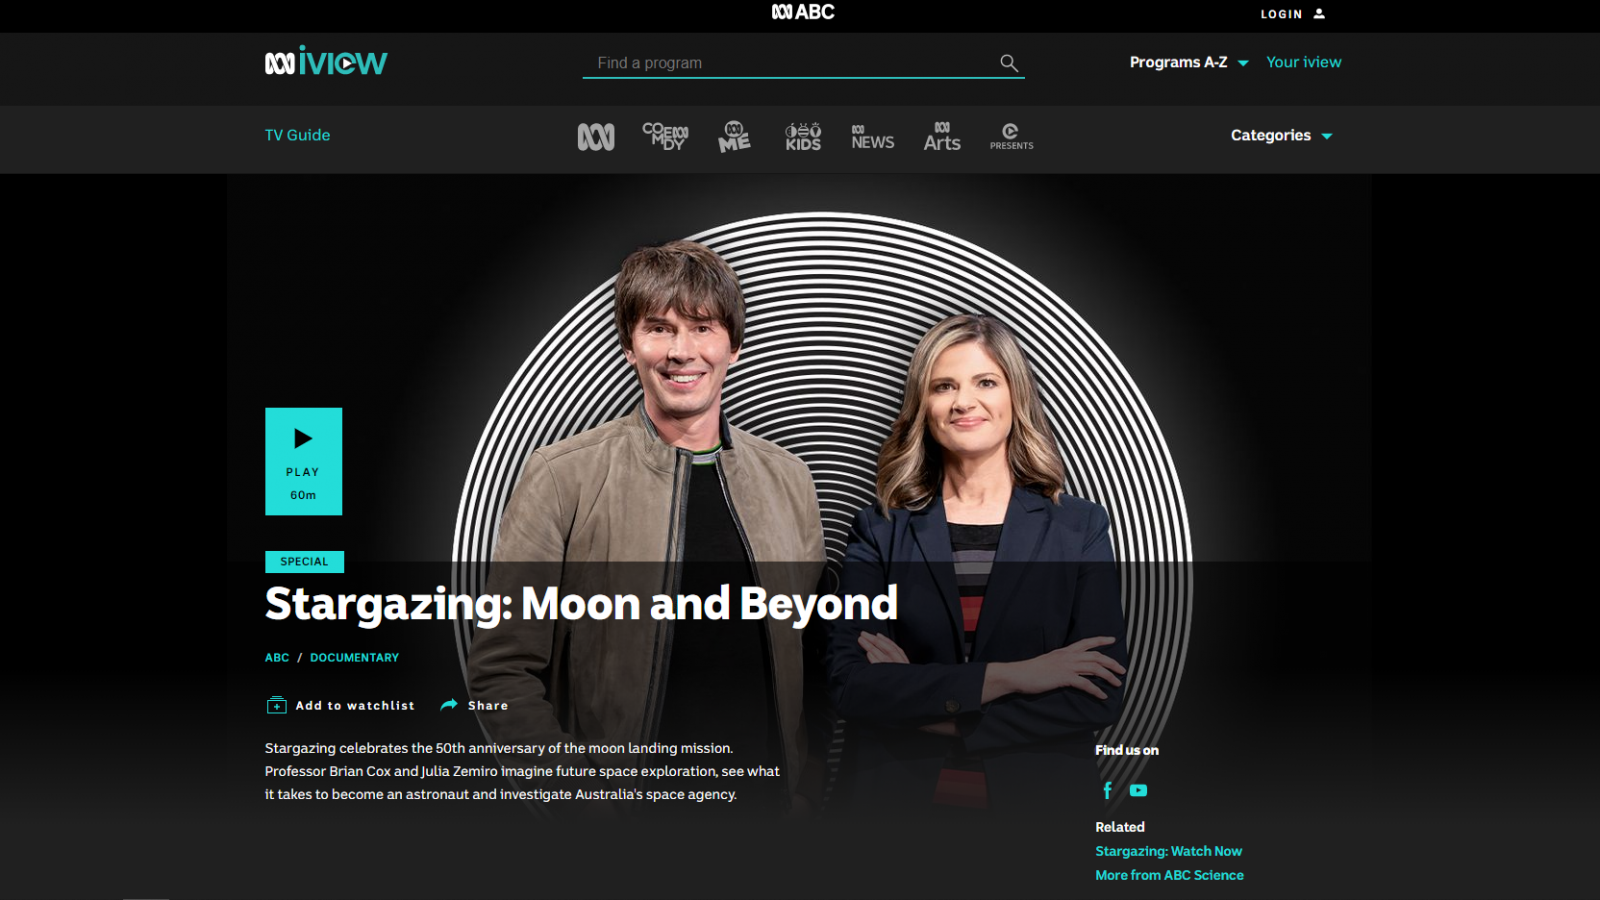 ABC's Stargazing 2019: Moon and Beyond. Featuring Greg's full tide explanation with 2.7 million views.